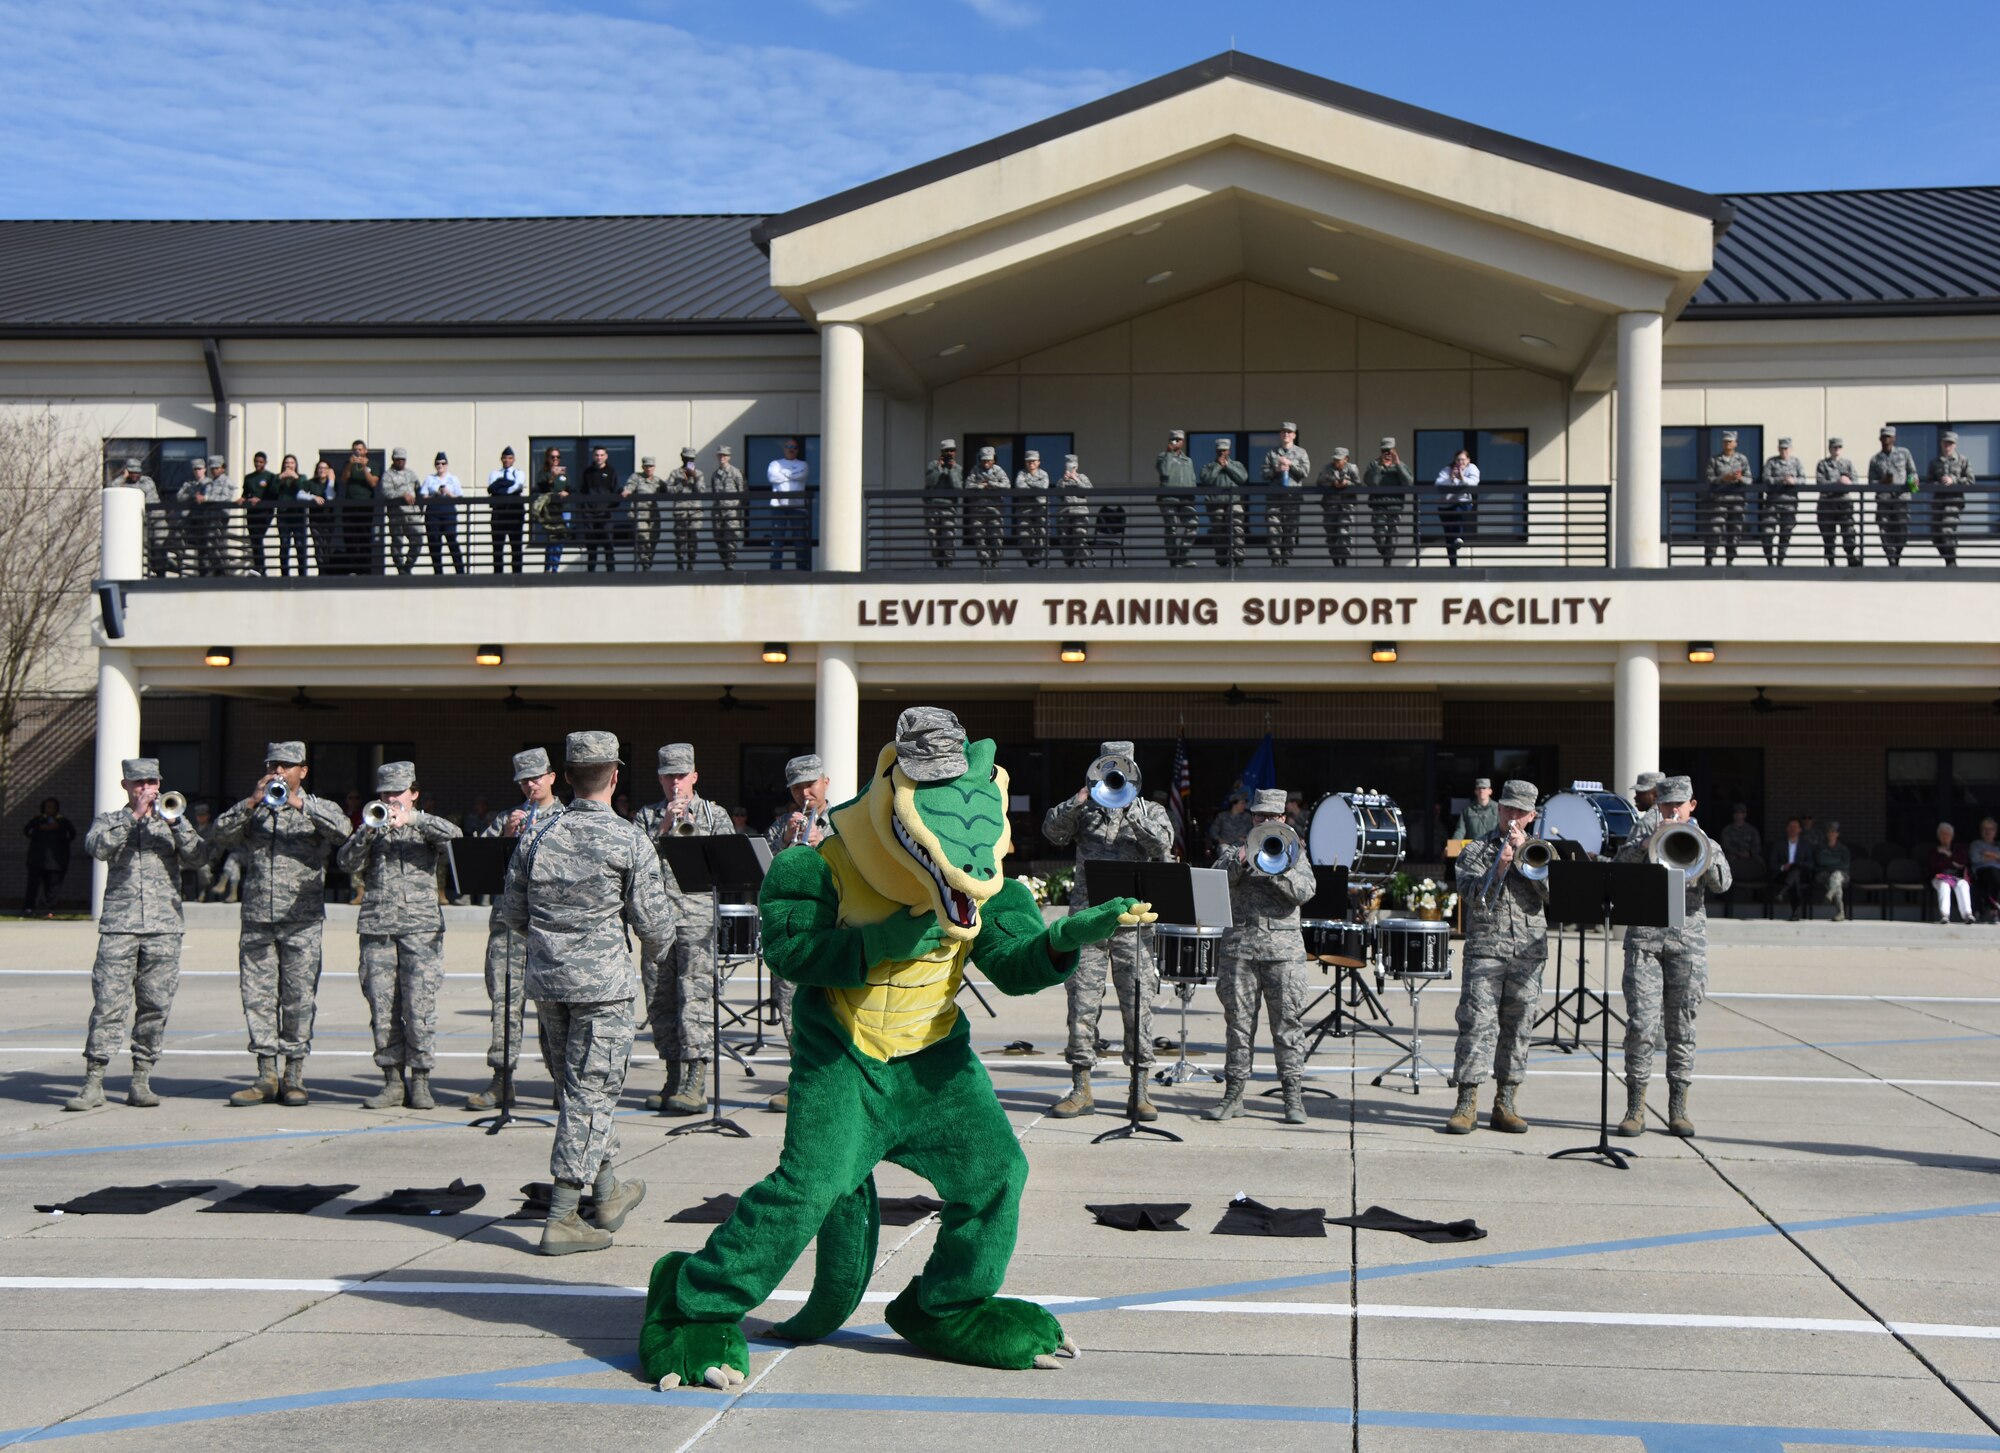 The 334th Training Squadron “Gator” mascot dances a Drum and Bugle Corps performance during the 81st Training Group drill down on the Levitow Training Support Facility drill pad March 9, 2018, on Keesler Air Force Base, Mississippi. Airmen from the 81st TRG competed in a quarterly open ranks inspection, regulation drill routine and freestyle drill routine. The 335th TRS “Bulls” took first place this quarter. (U.S. Air Force photo by Kemberly Groue)